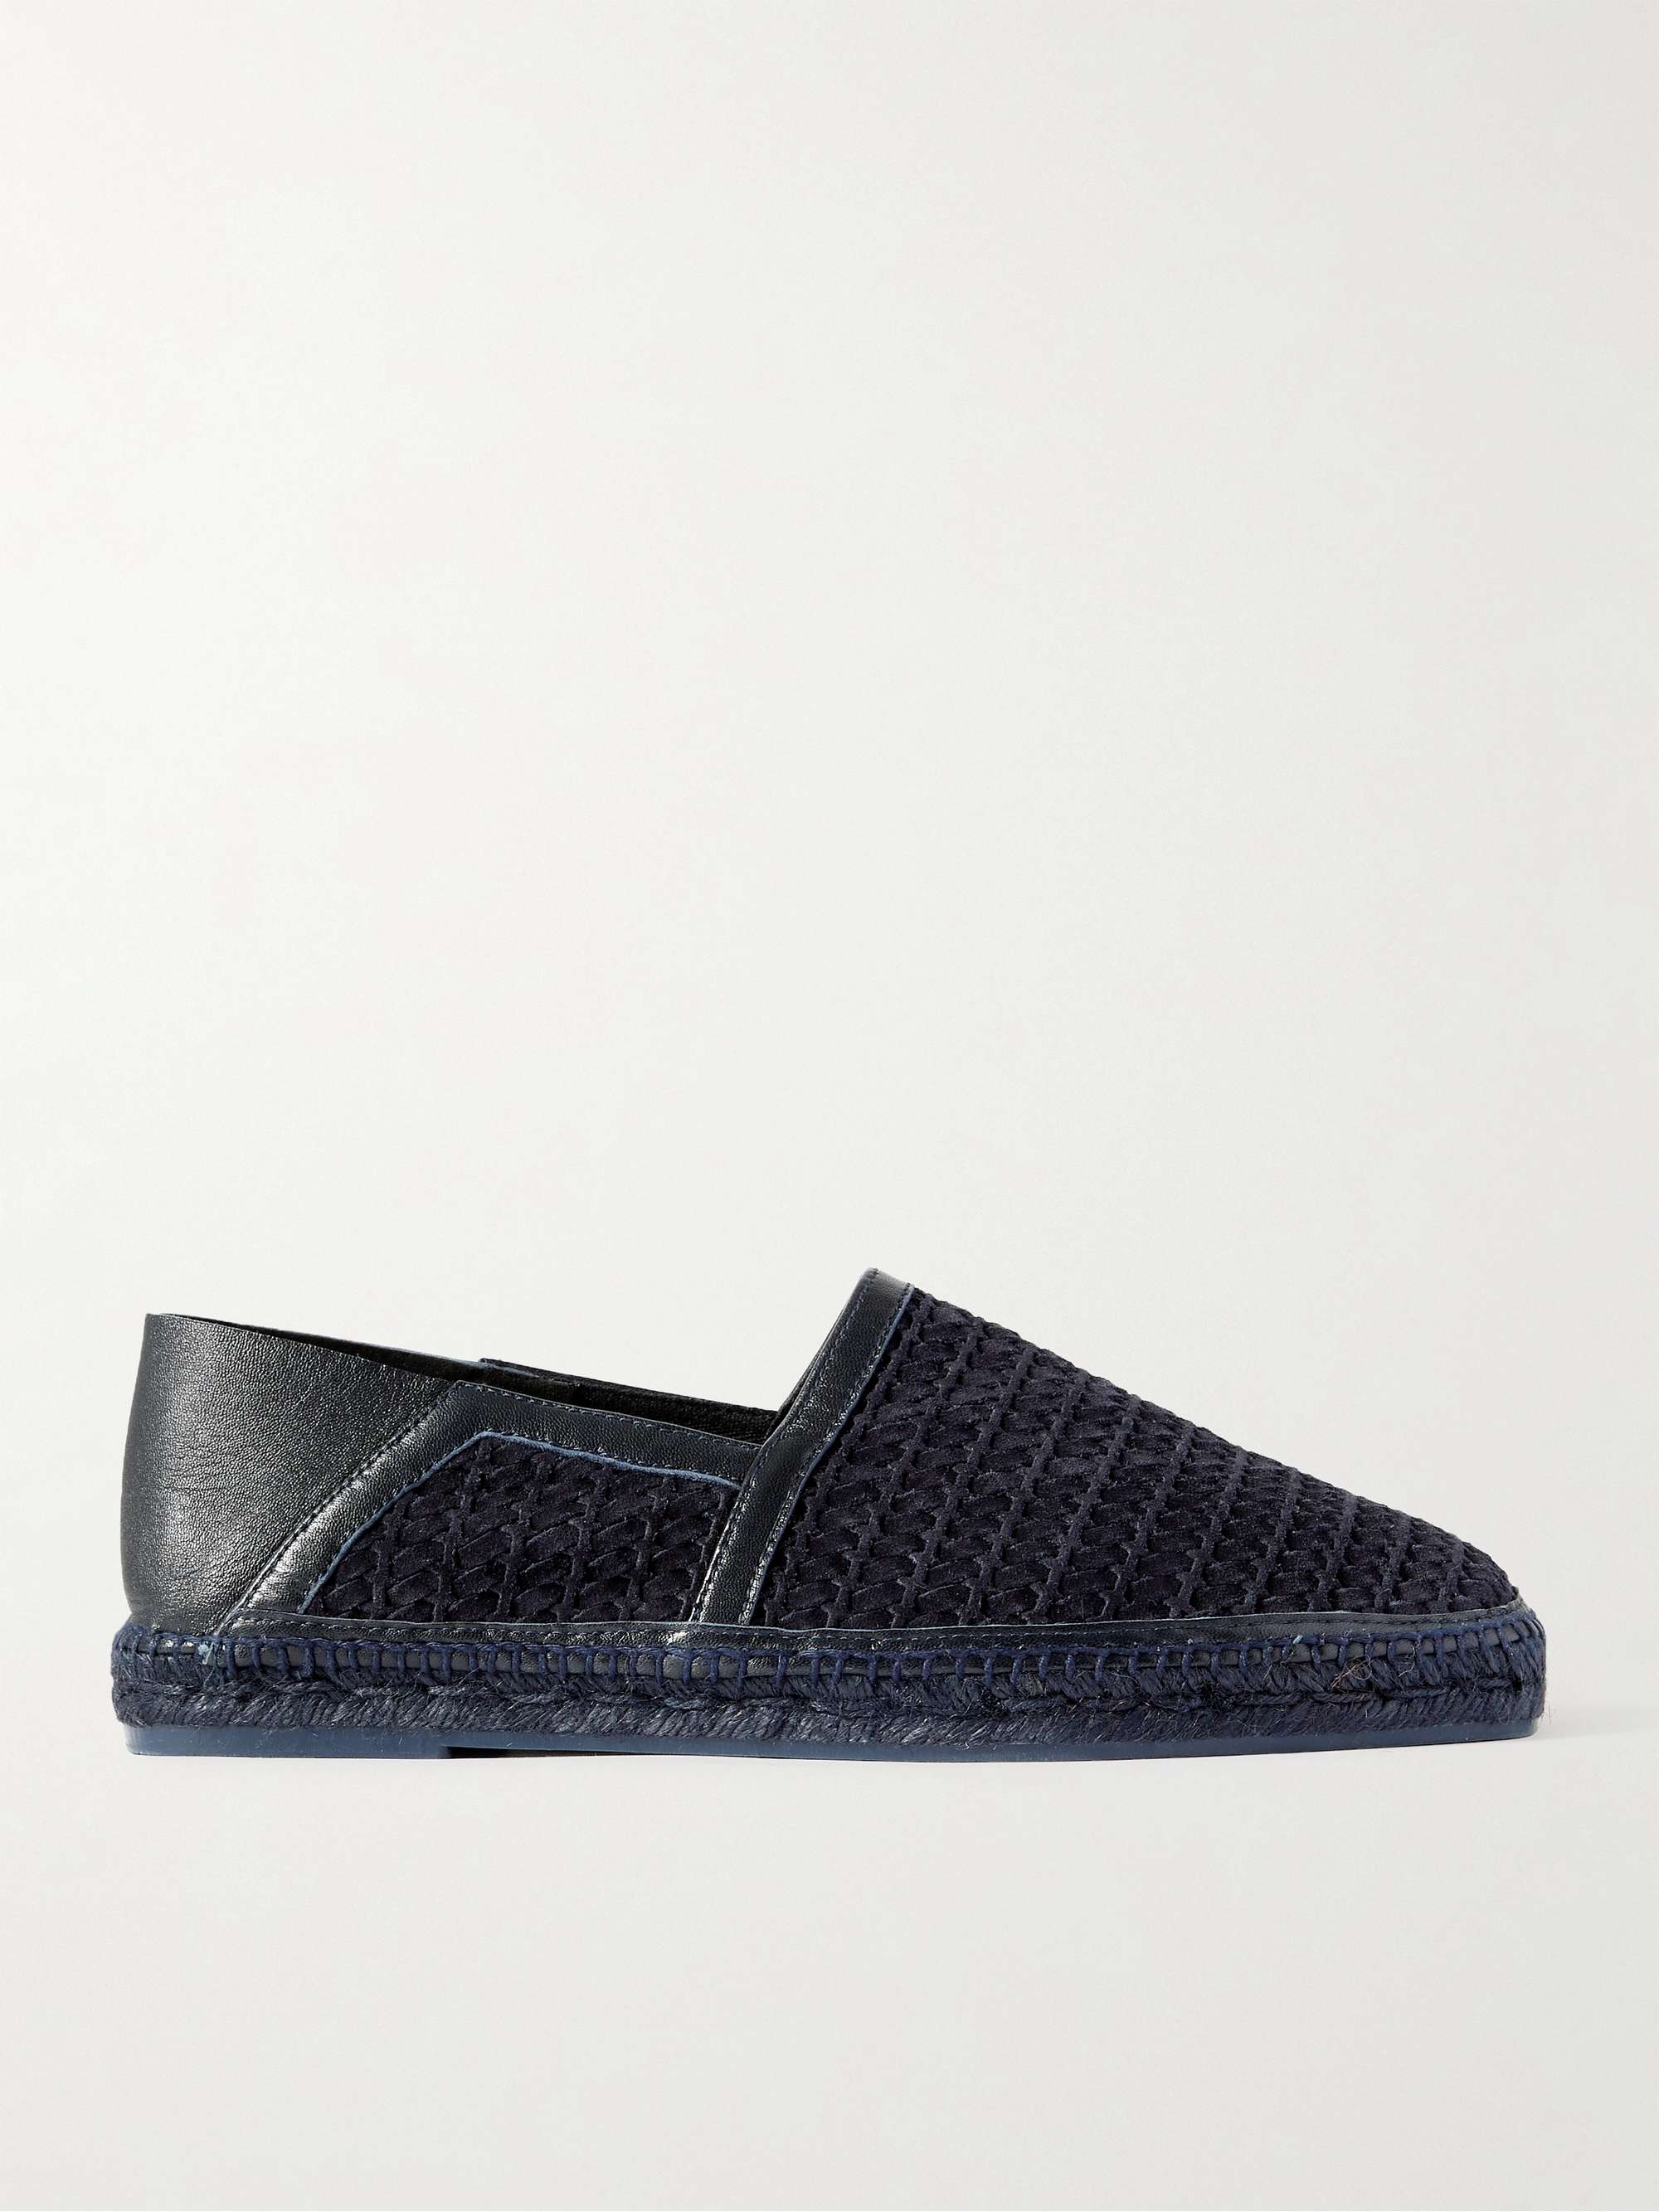 TOM FORD Barnes Collapsible-Heel Woven Suede and Leather Espadrilles